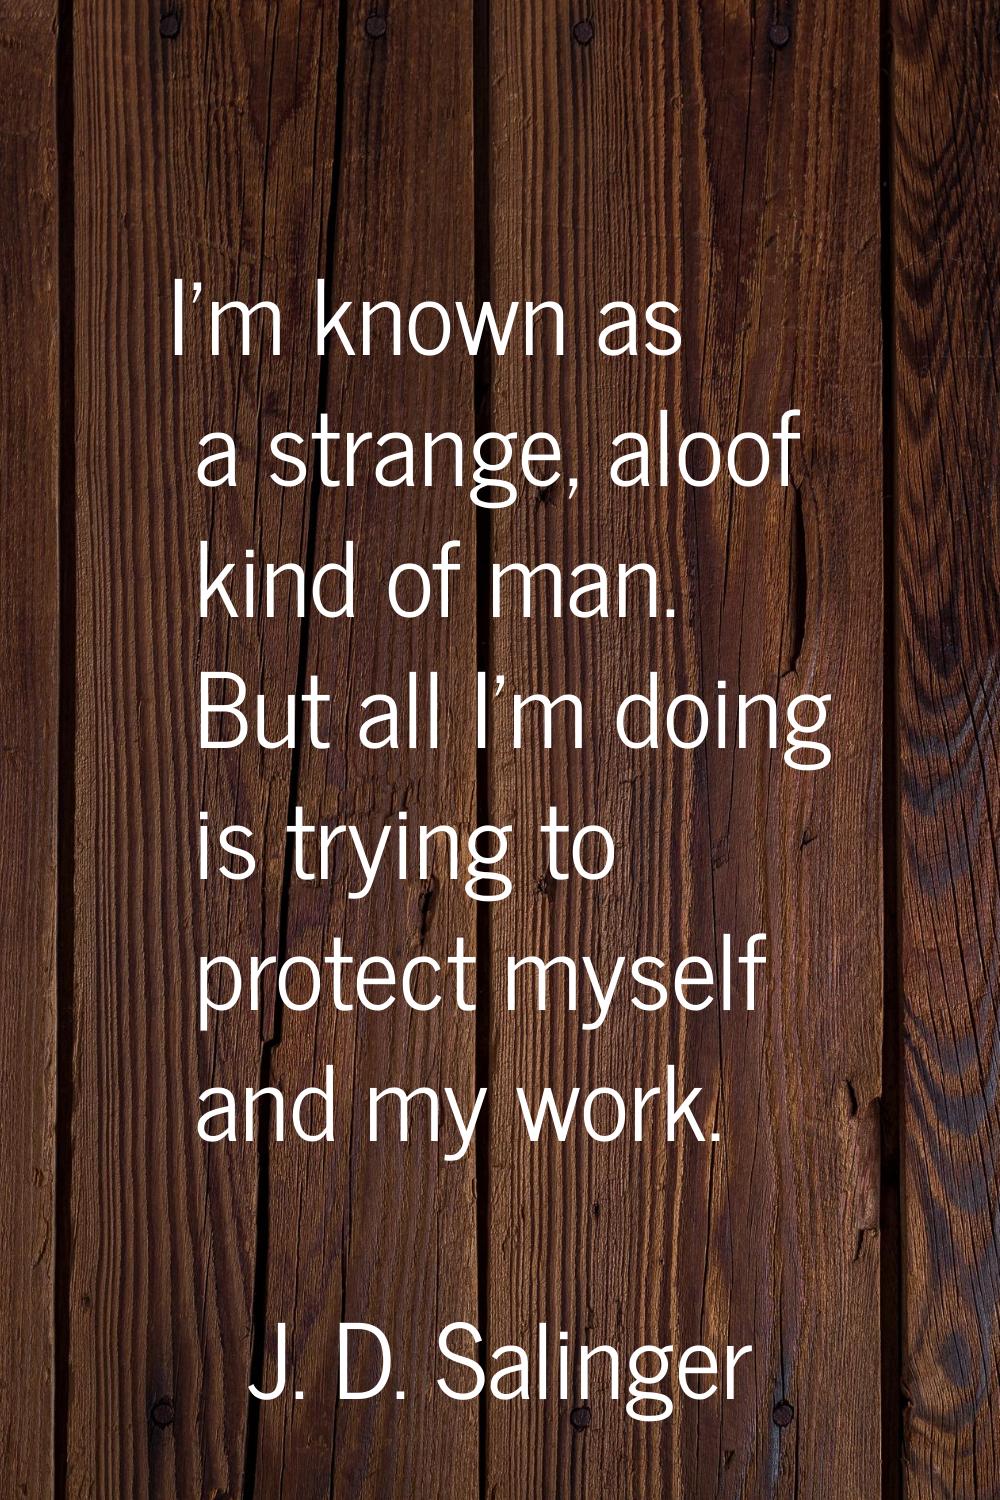 I'm known as a strange, aloof kind of man. But all I'm doing is trying to protect myself and my wor